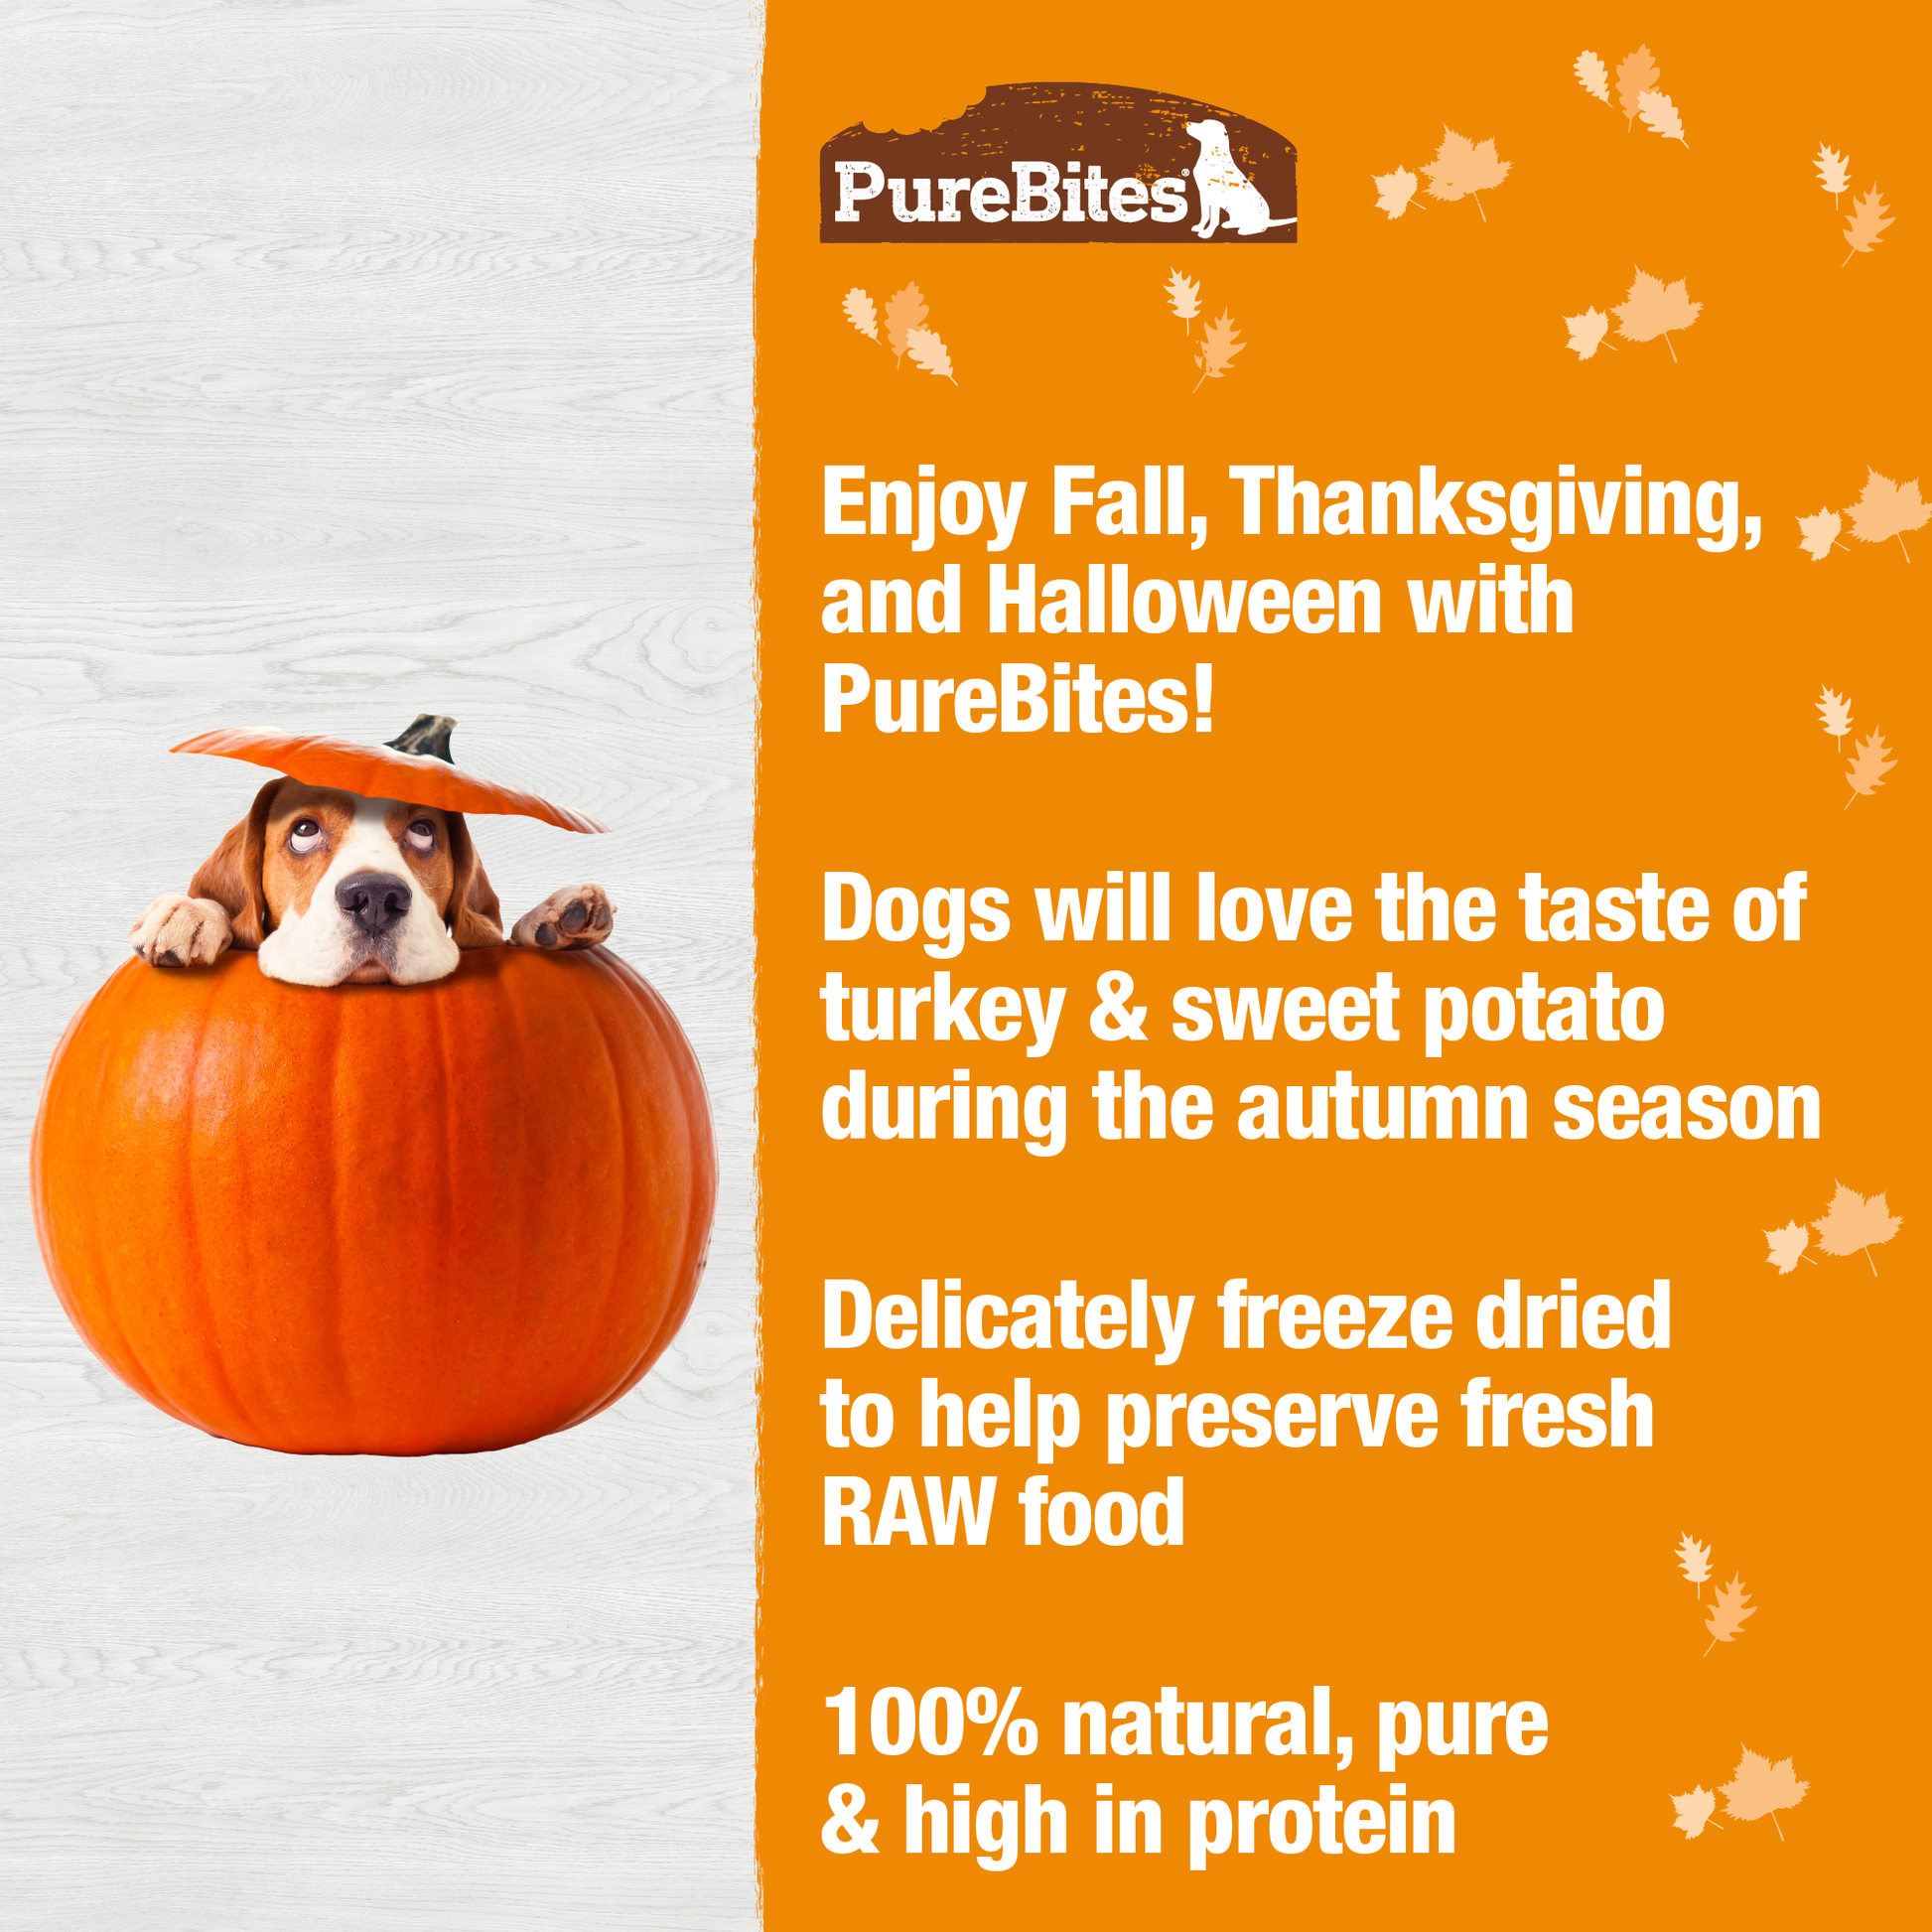 Made fresh & pure means more RAW protein and nutrients packed into every bag. Our turkey & sweet potato is freeze dried to help preserve its RAW taste, and nutrition, and mirror a dog’s ancestral diet